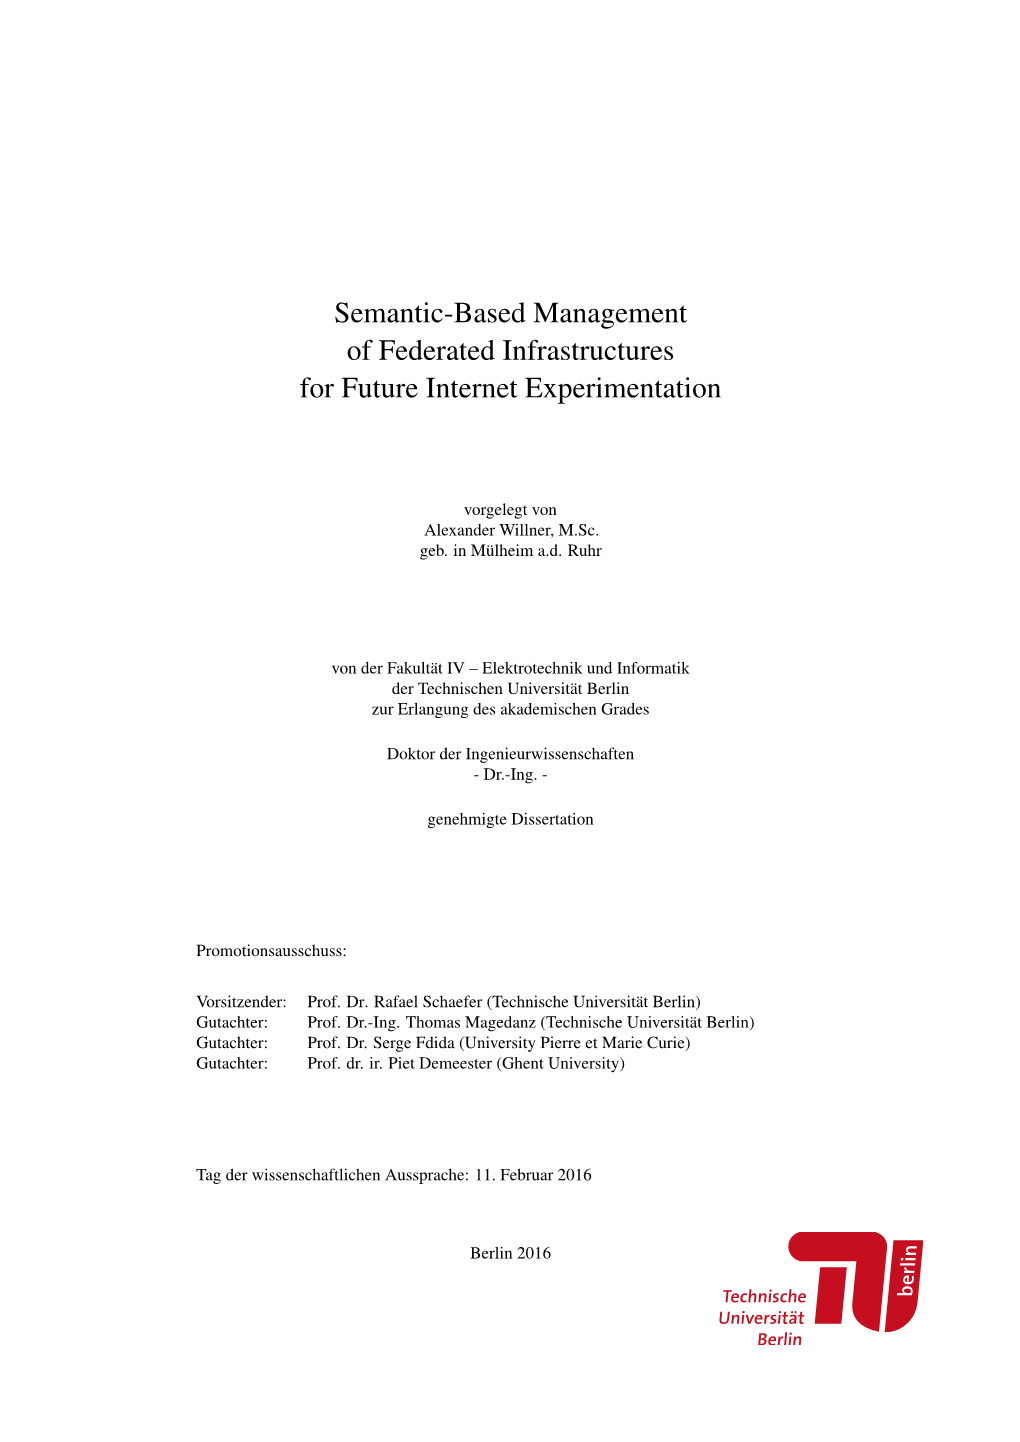 Semantic-Based Management of Federated Infrastructures for Future Internet Experimentation